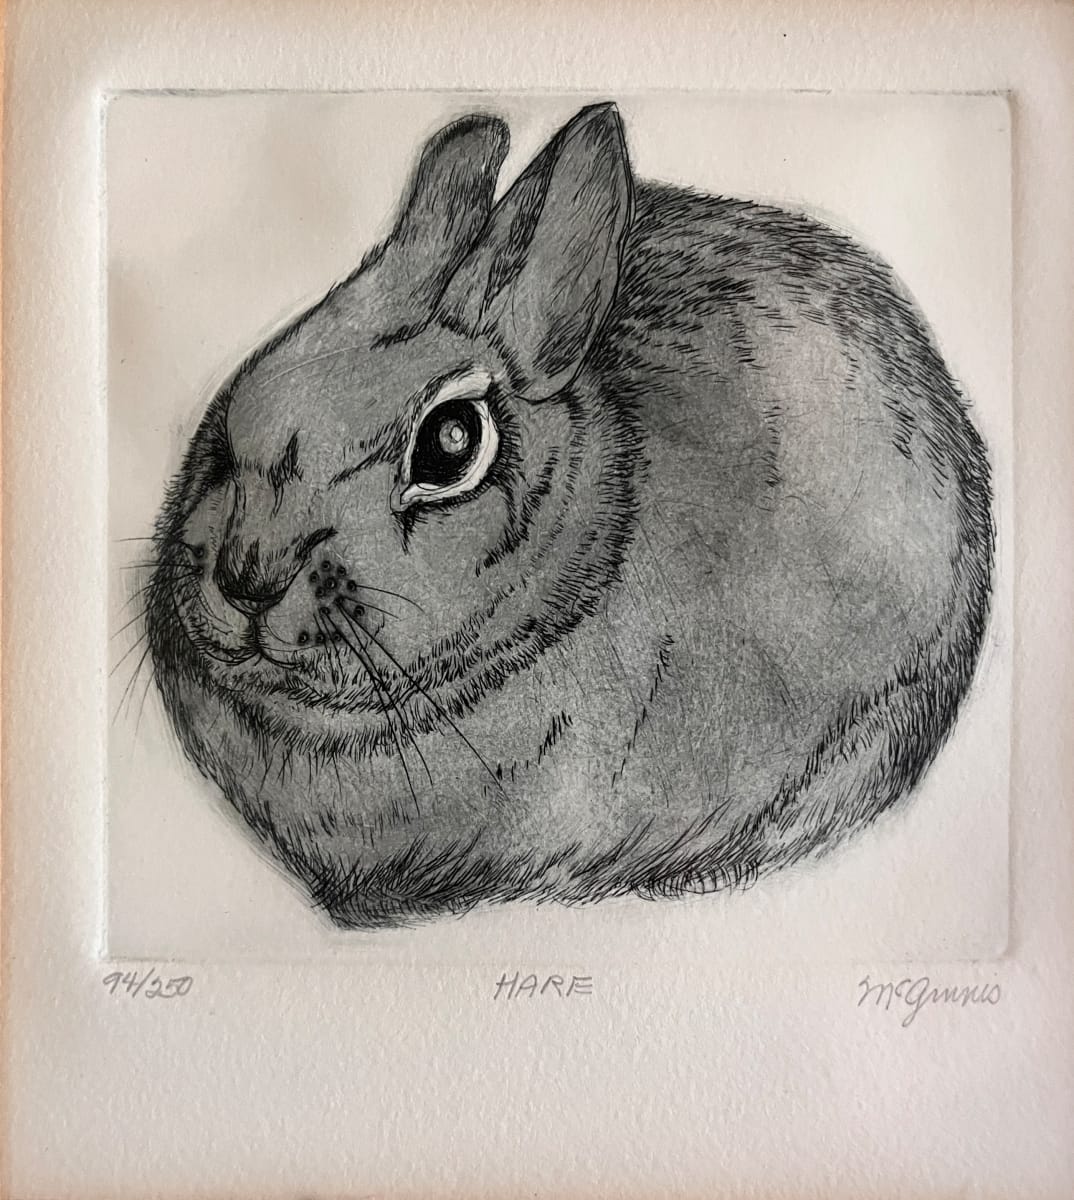 1970s "Hare" Dry Point Etching by McGinnis 